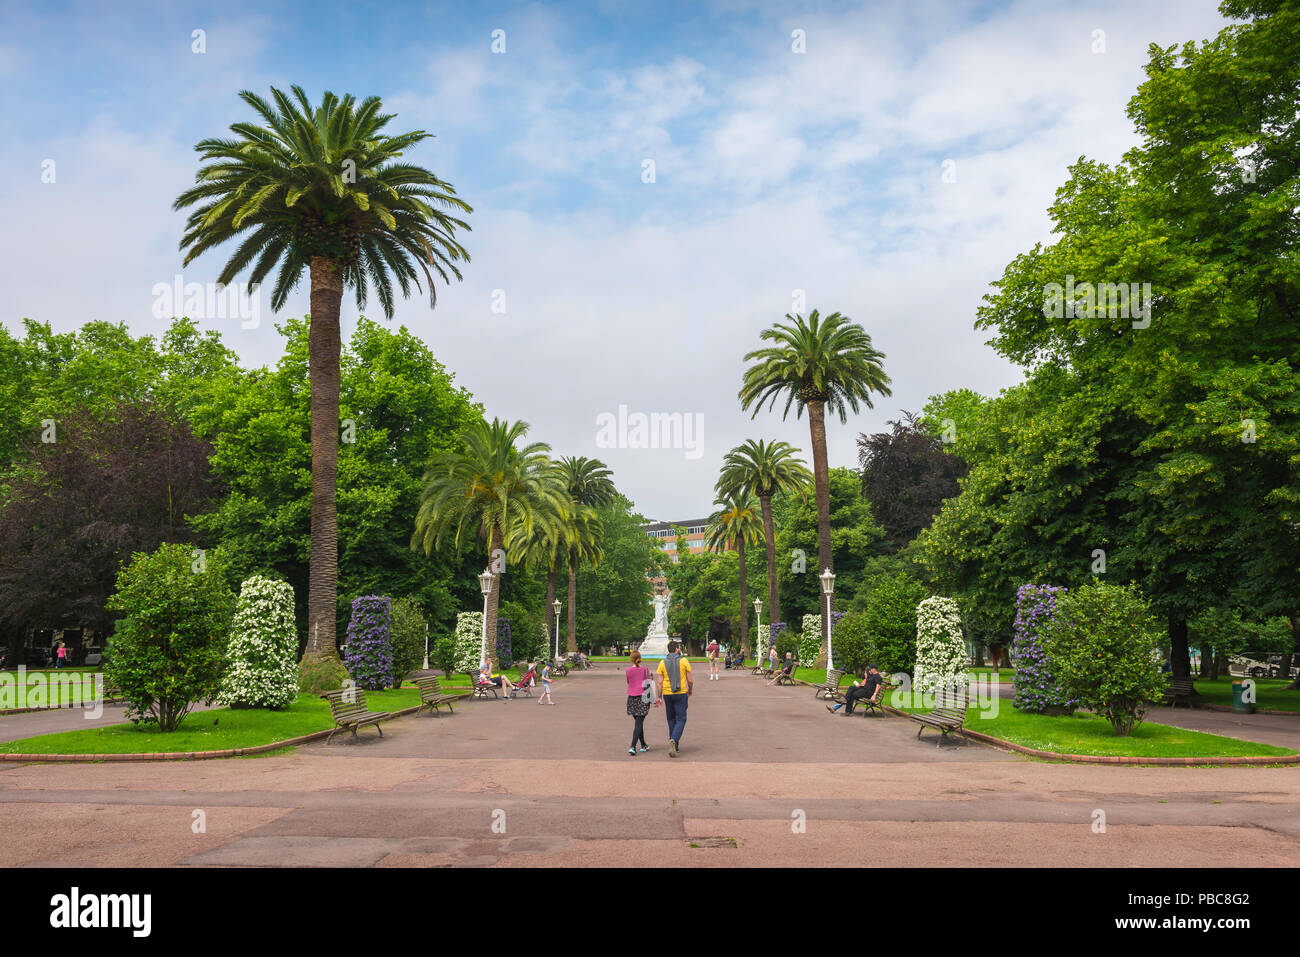 Bilbao park Spain, view of a young couple walking along a footpath in the center of the Parque de Dona Casilda d'Iturriza in Bilbao, Spain. Stock Photo